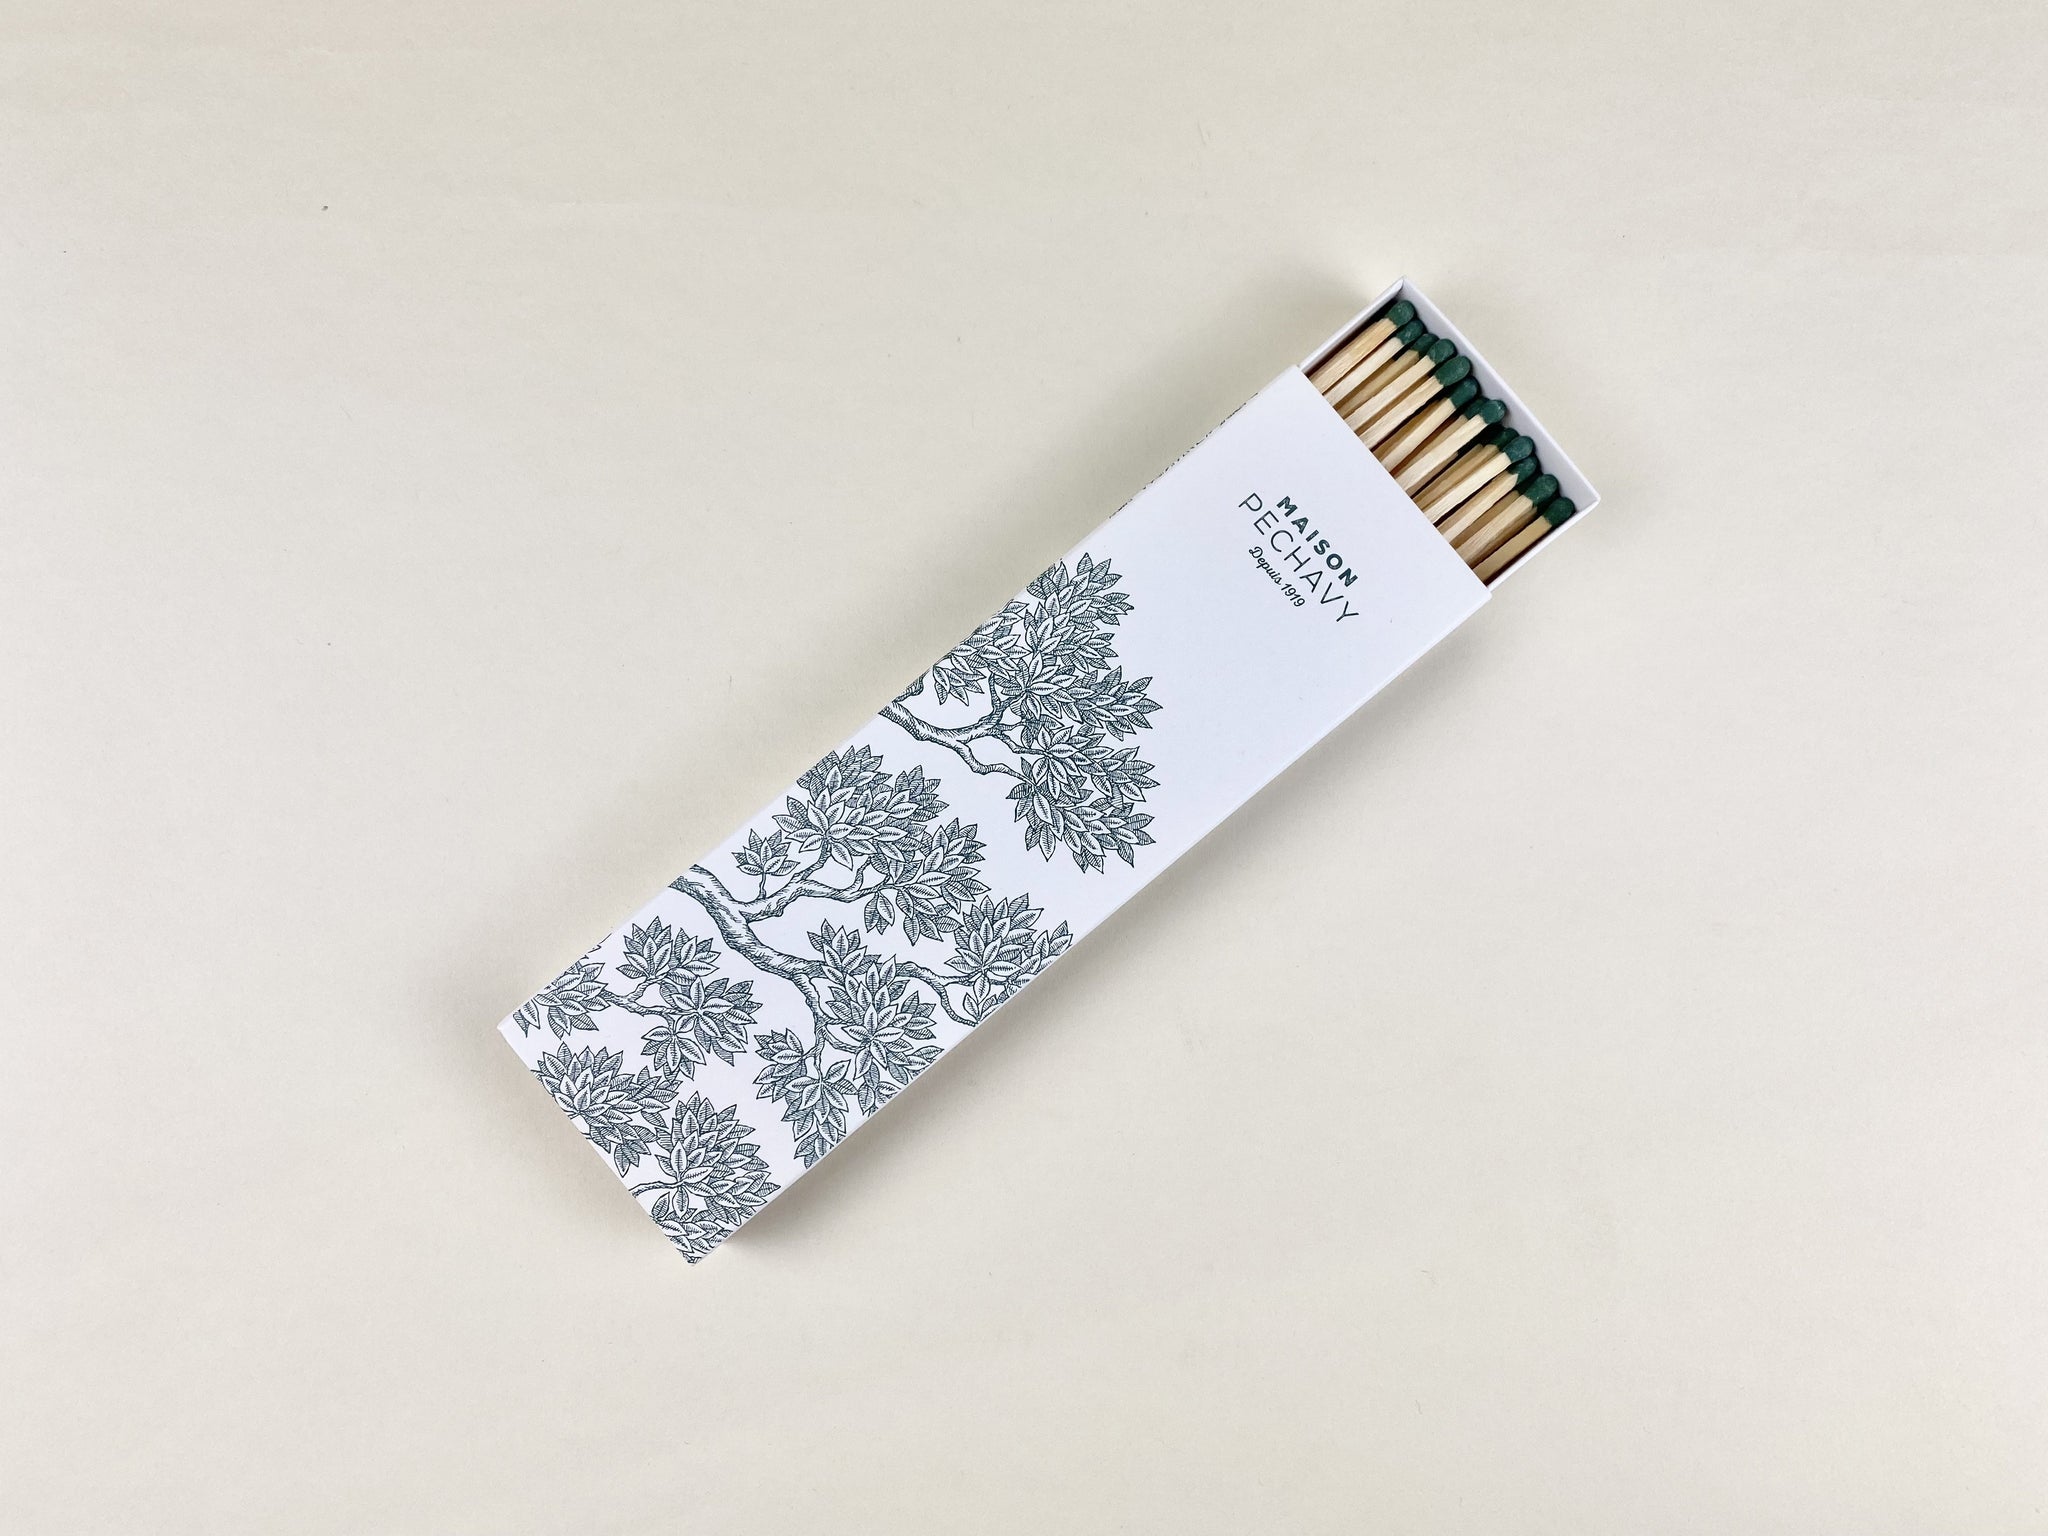 Maison Pechavy Long Matches (White and Lichen) - French Dry Goods